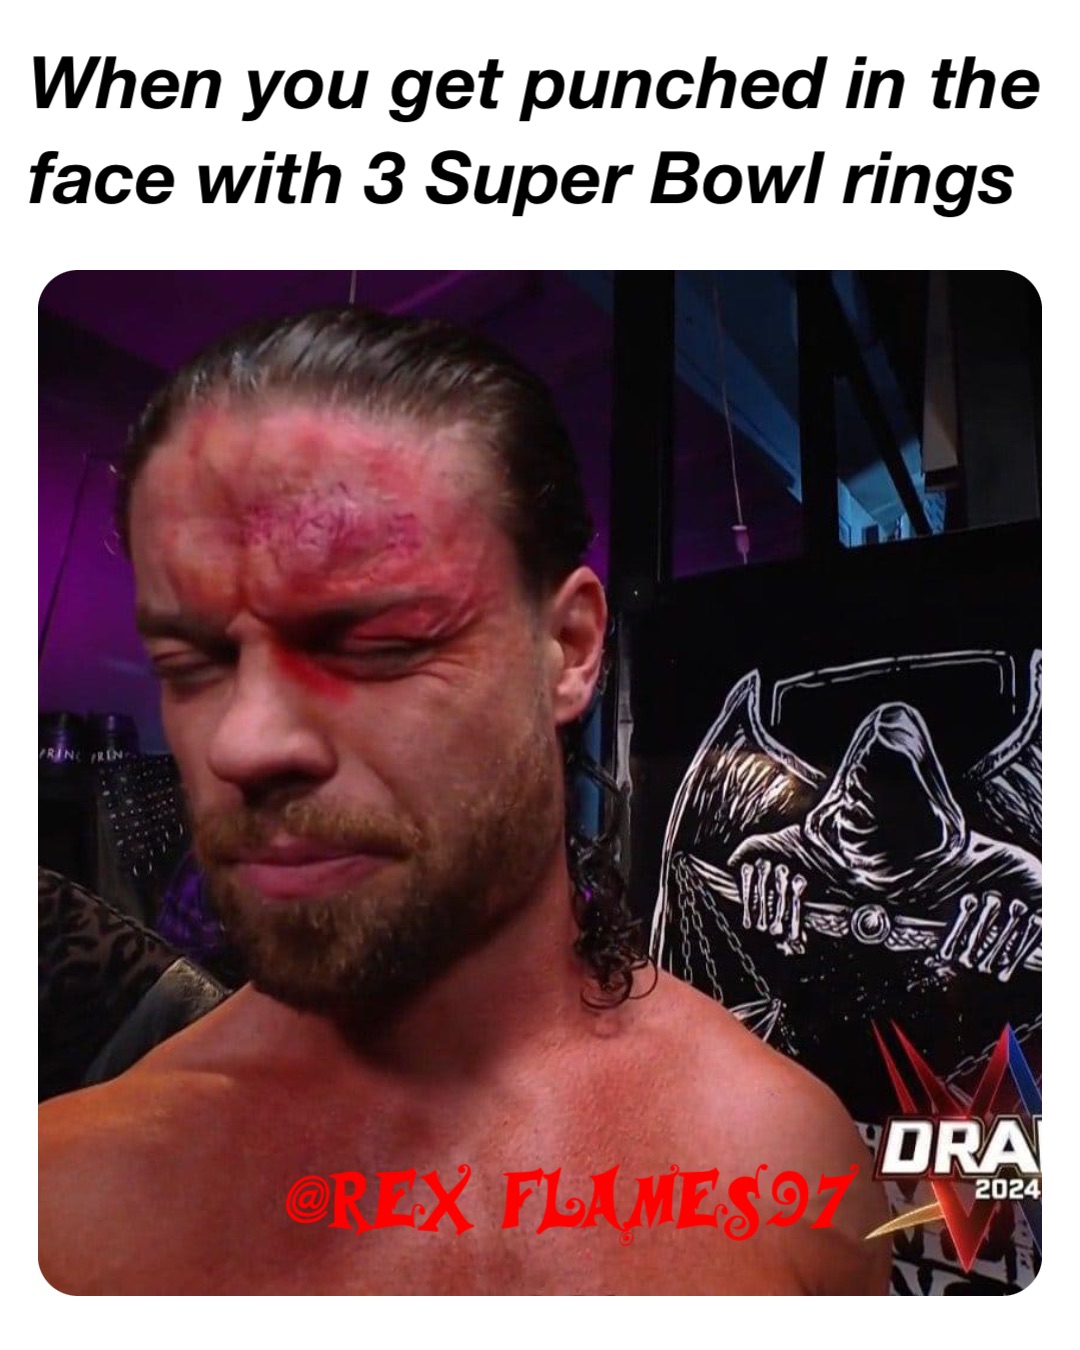 When you get punched in the face with 3 Super Bowl rings